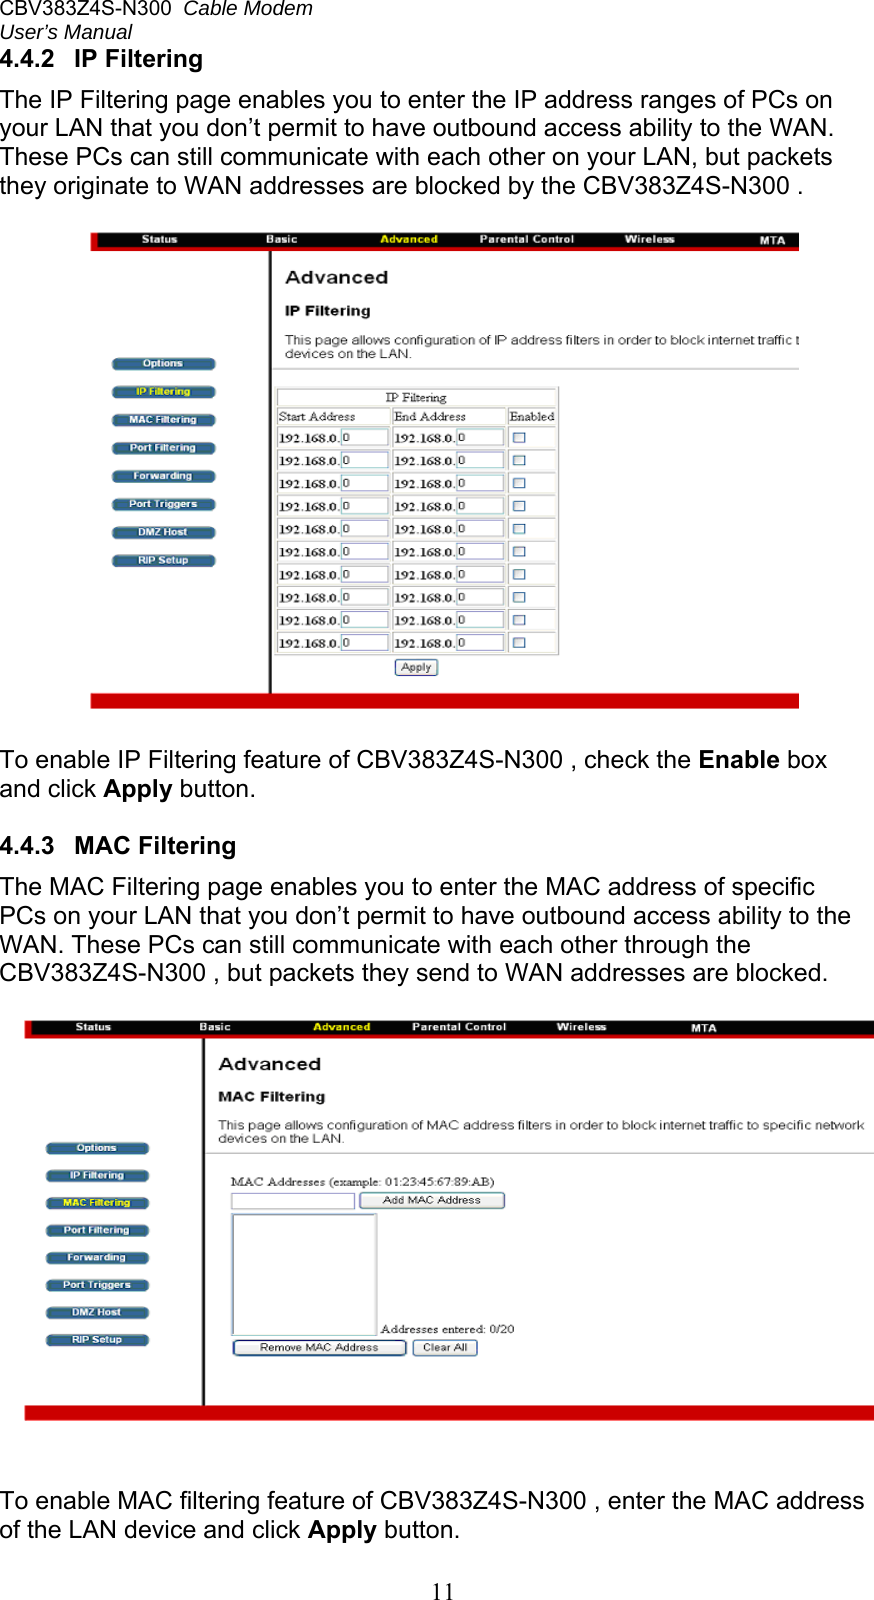 CBV383Z4S-N300  Cable Modem  User’s Manual   114.4.2  IP Filtering The IP Filtering page enables you to enter the IP address ranges of PCs on your LAN that you don’t permit to have outbound access ability to the WAN. These PCs can still communicate with each other on your LAN, but packets they originate to WAN addresses are blocked by the CBV383Z4S-N300 .    To enable IP Filtering feature of CBV383Z4S-N300 , check the Enable box and click Apply button.  4.4.3  MAC Filtering The MAC Filtering page enables you to enter the MAC address of specific PCs on your LAN that you don’t permit to have outbound access ability to the WAN. These PCs can still communicate with each other through the CBV383Z4S-N300 , but packets they send to WAN addresses are blocked.    To enable MAC filtering feature of CBV383Z4S-N300 , enter the MAC address of the LAN device and click Apply button. 